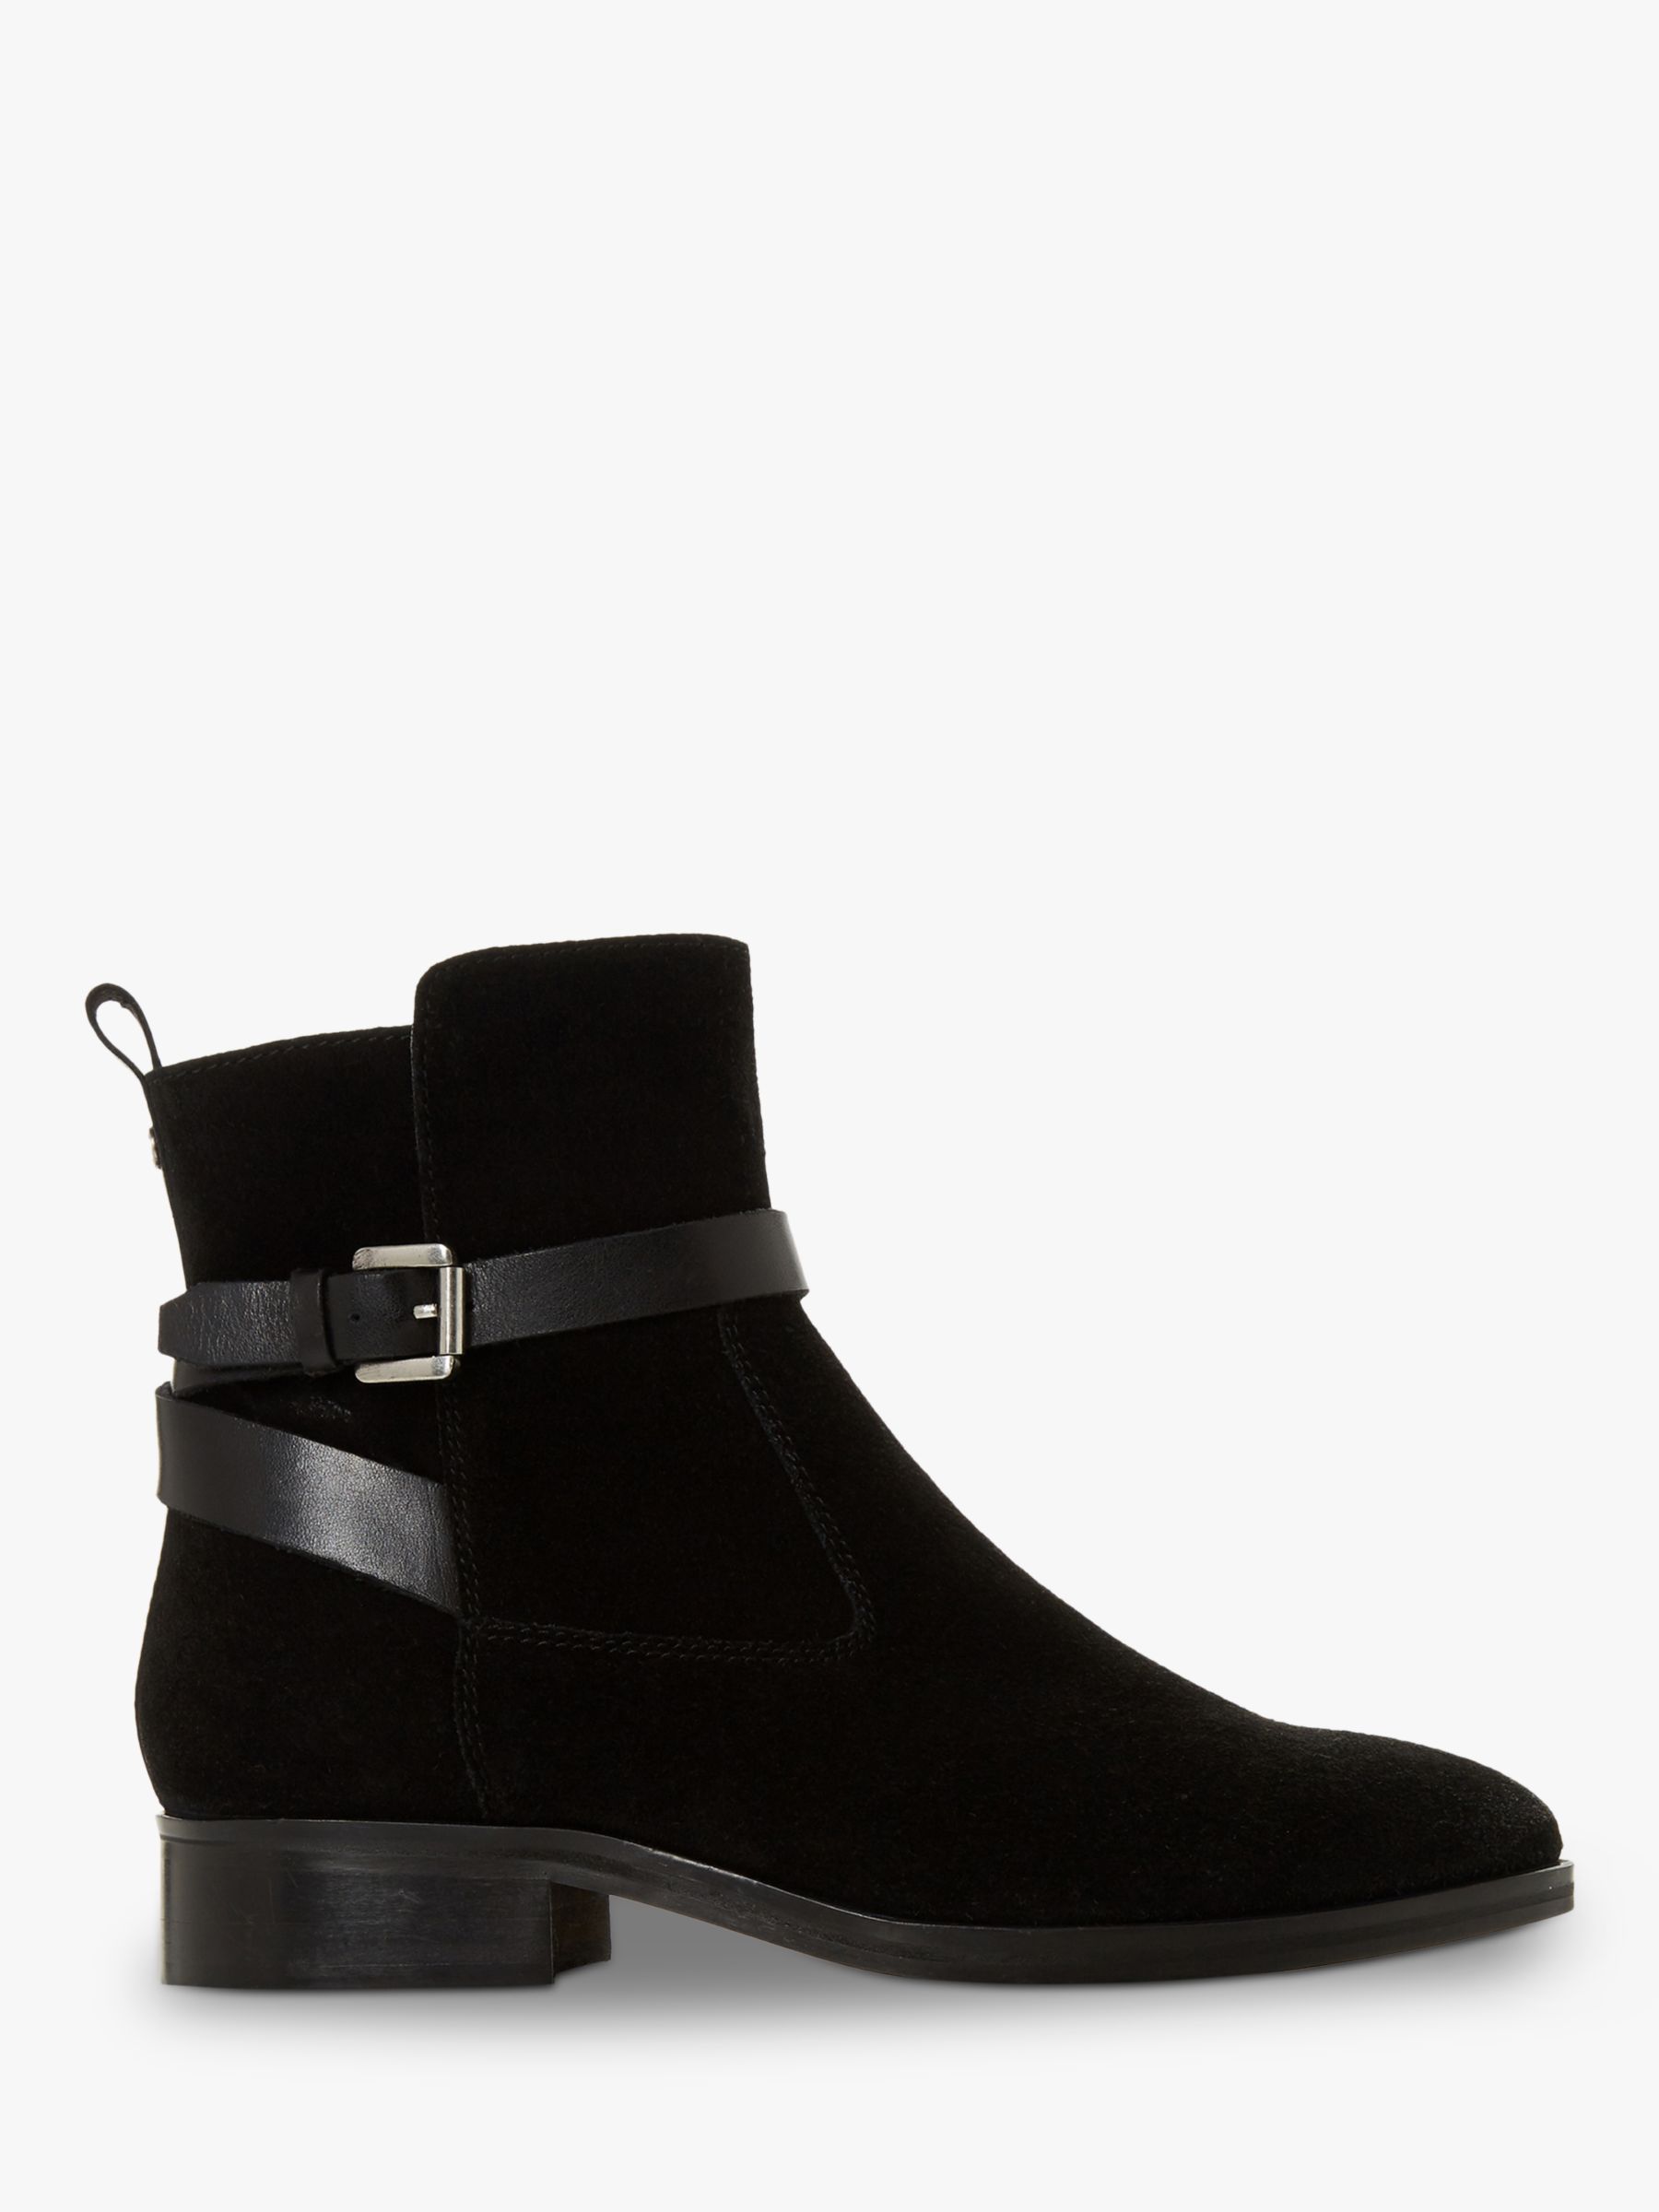 Dune Patrizo Wrap Strap Suede Ankle Boots